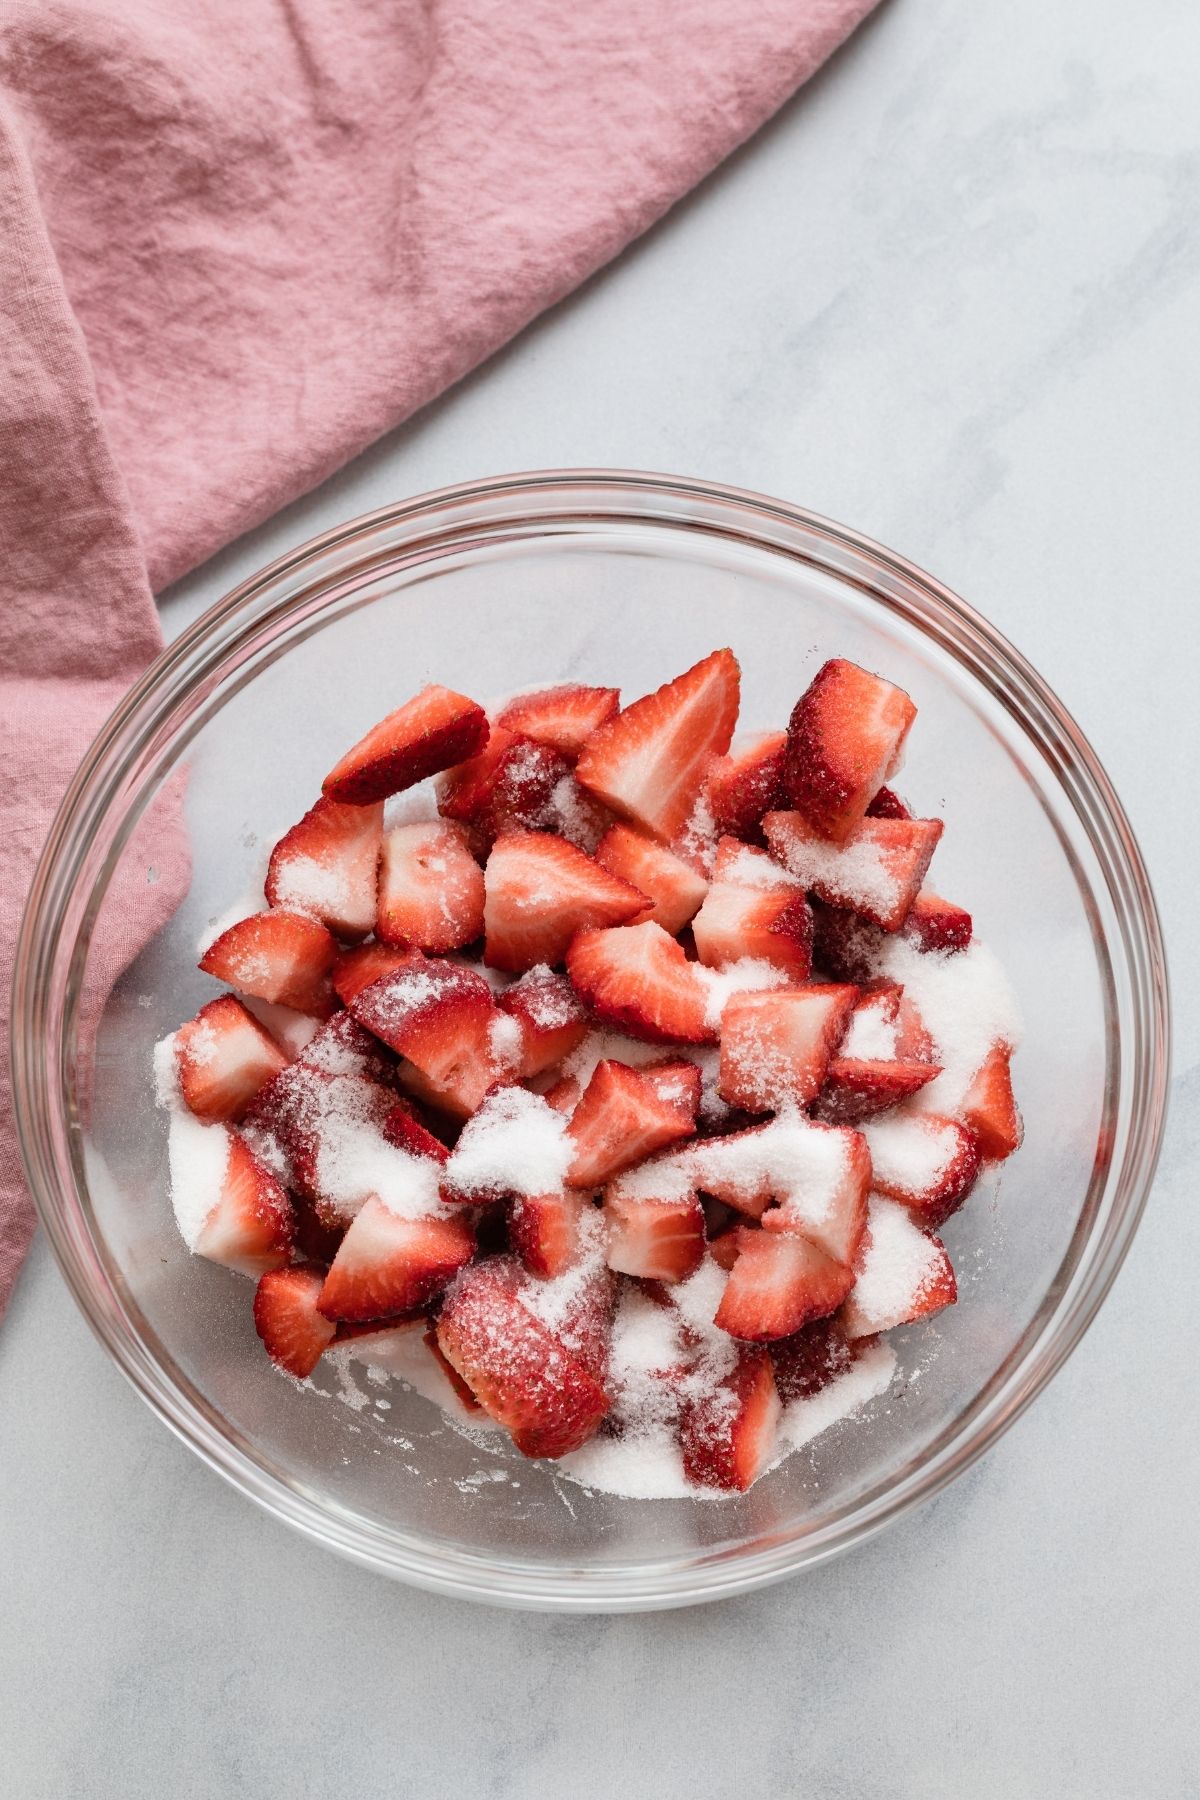 Chopped strawberries and sugar in bowl.